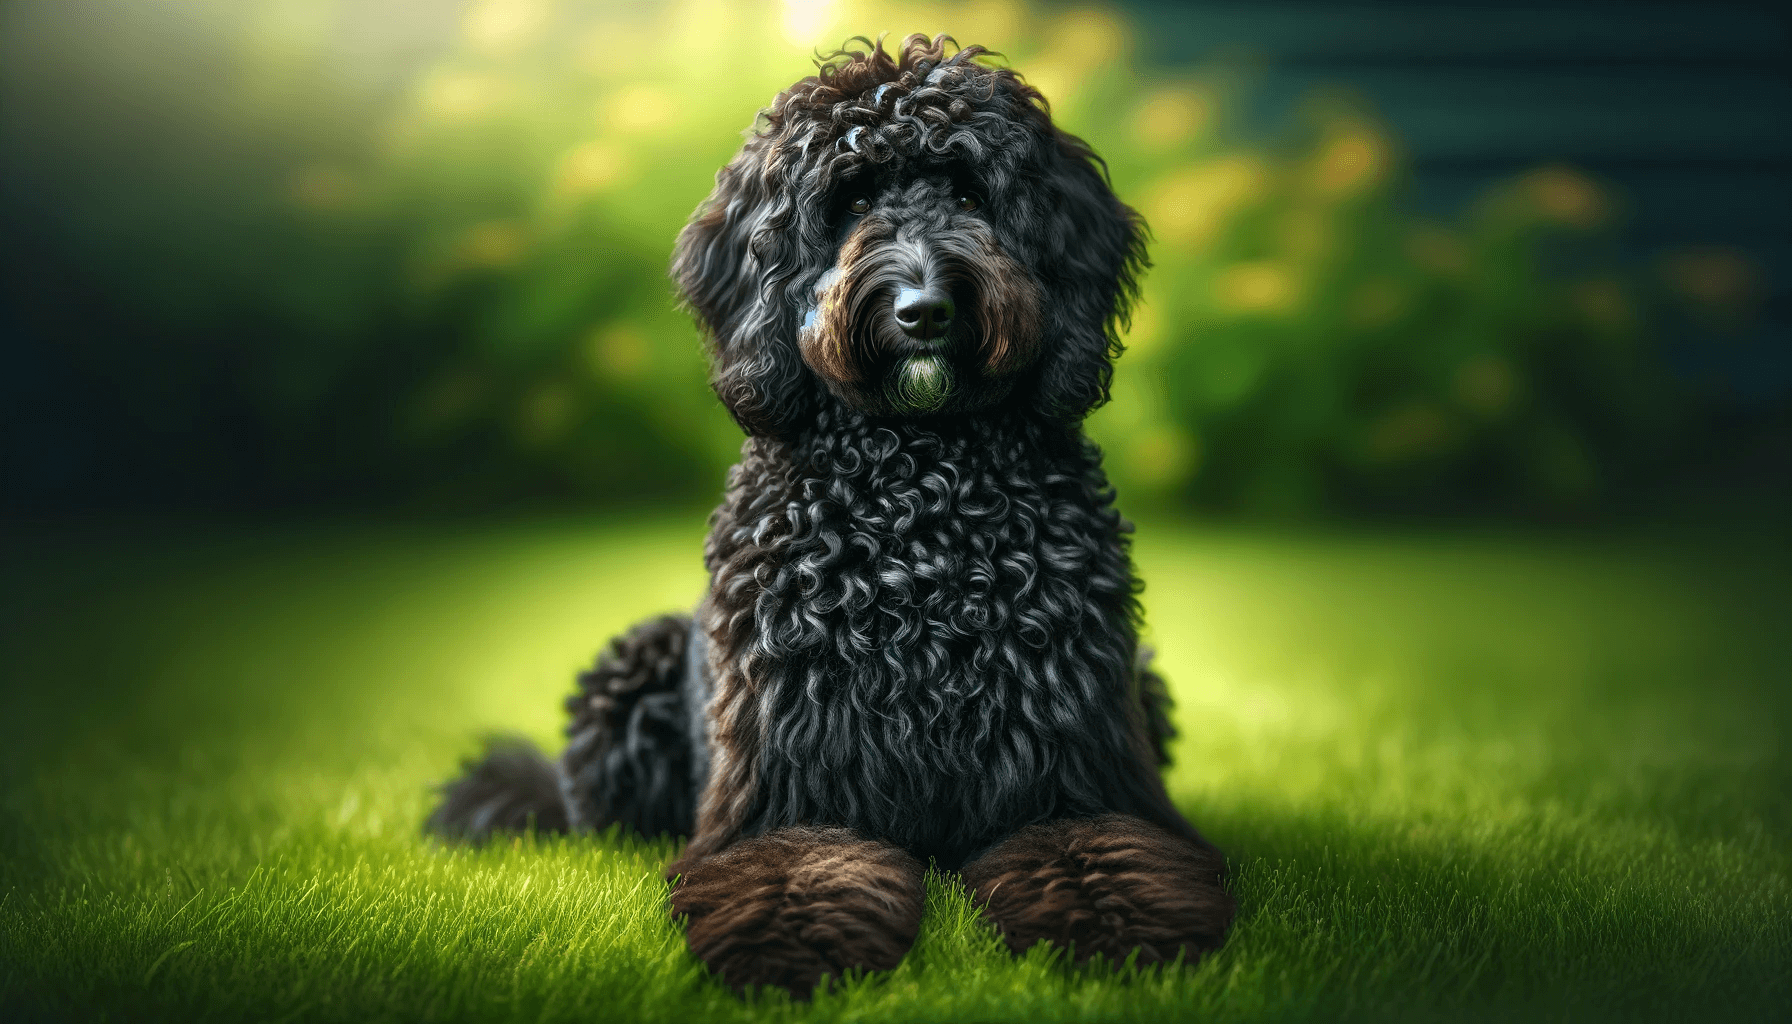 Black Aussiedoodle with a tight-curled rich black coat sitting on grass exuding a playful and attentive attitude